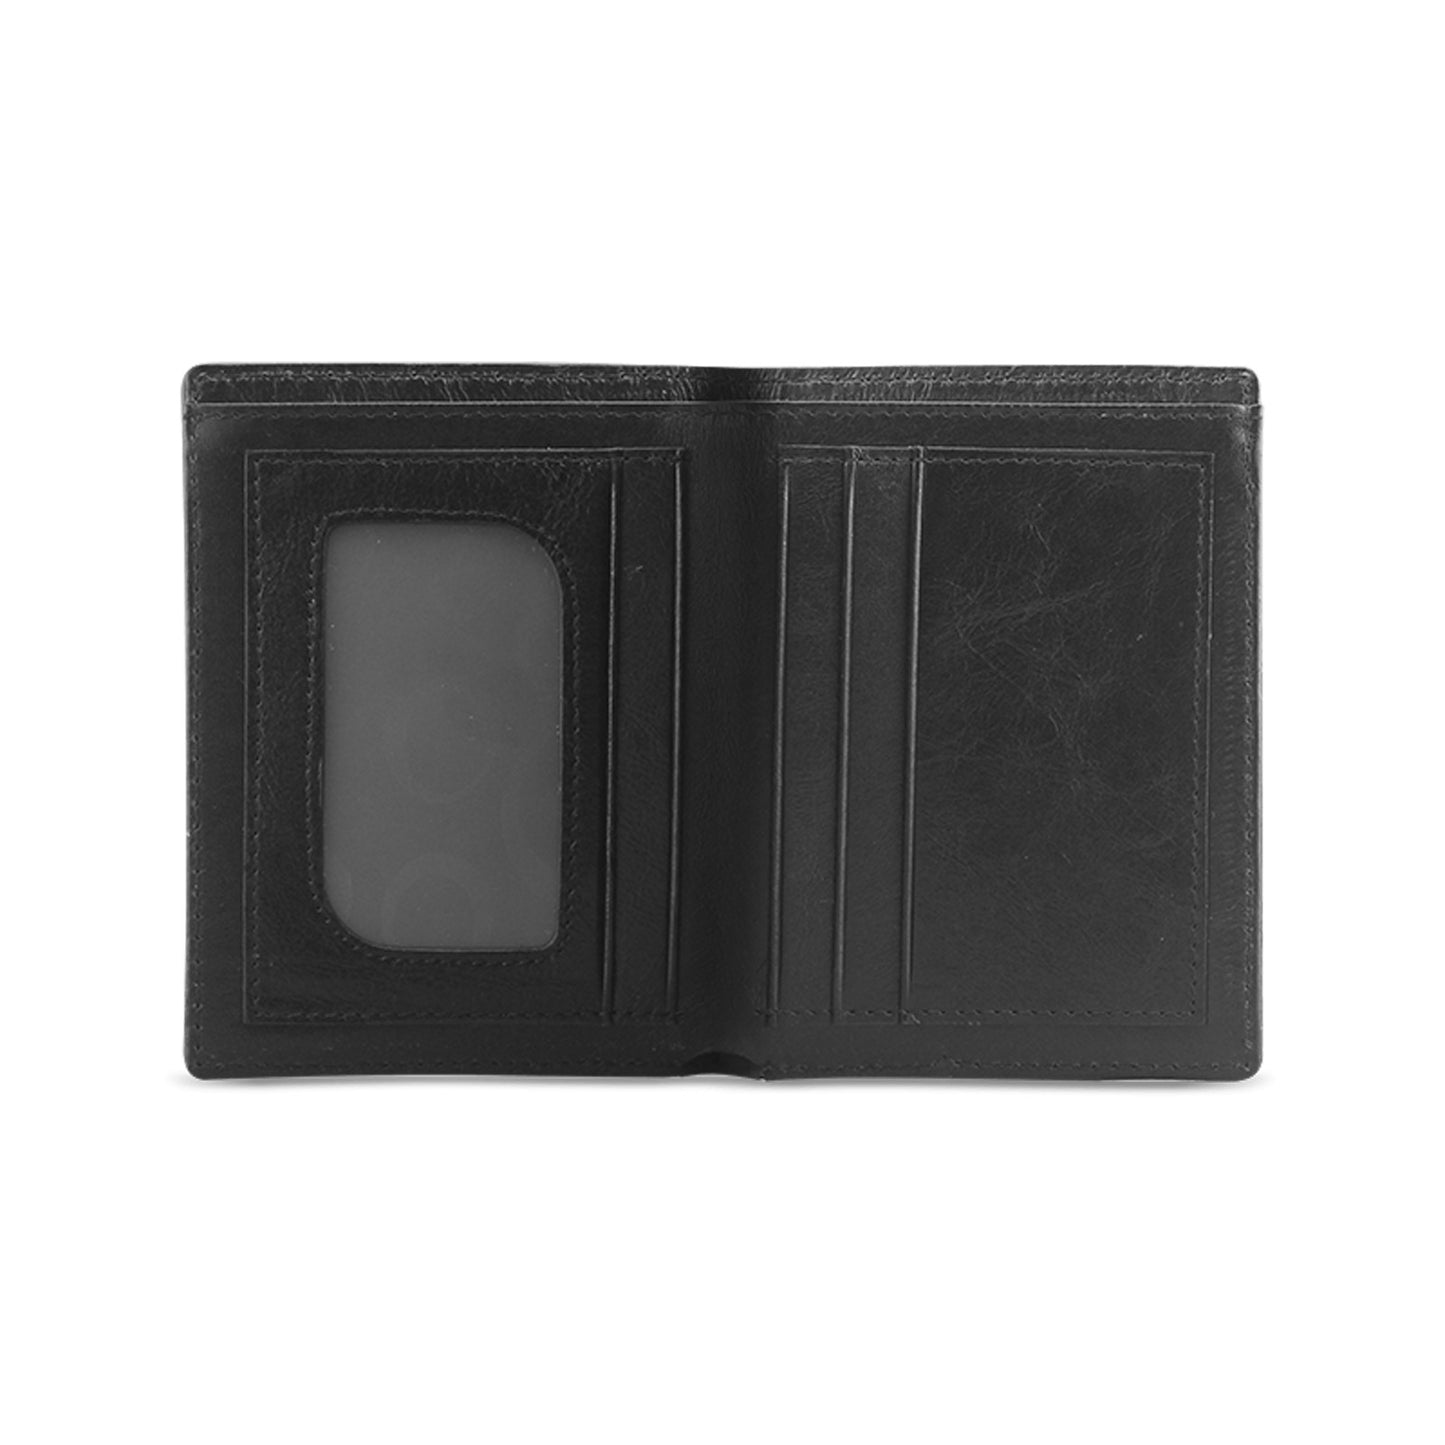 Mickey Flags Men's Leather Wallet